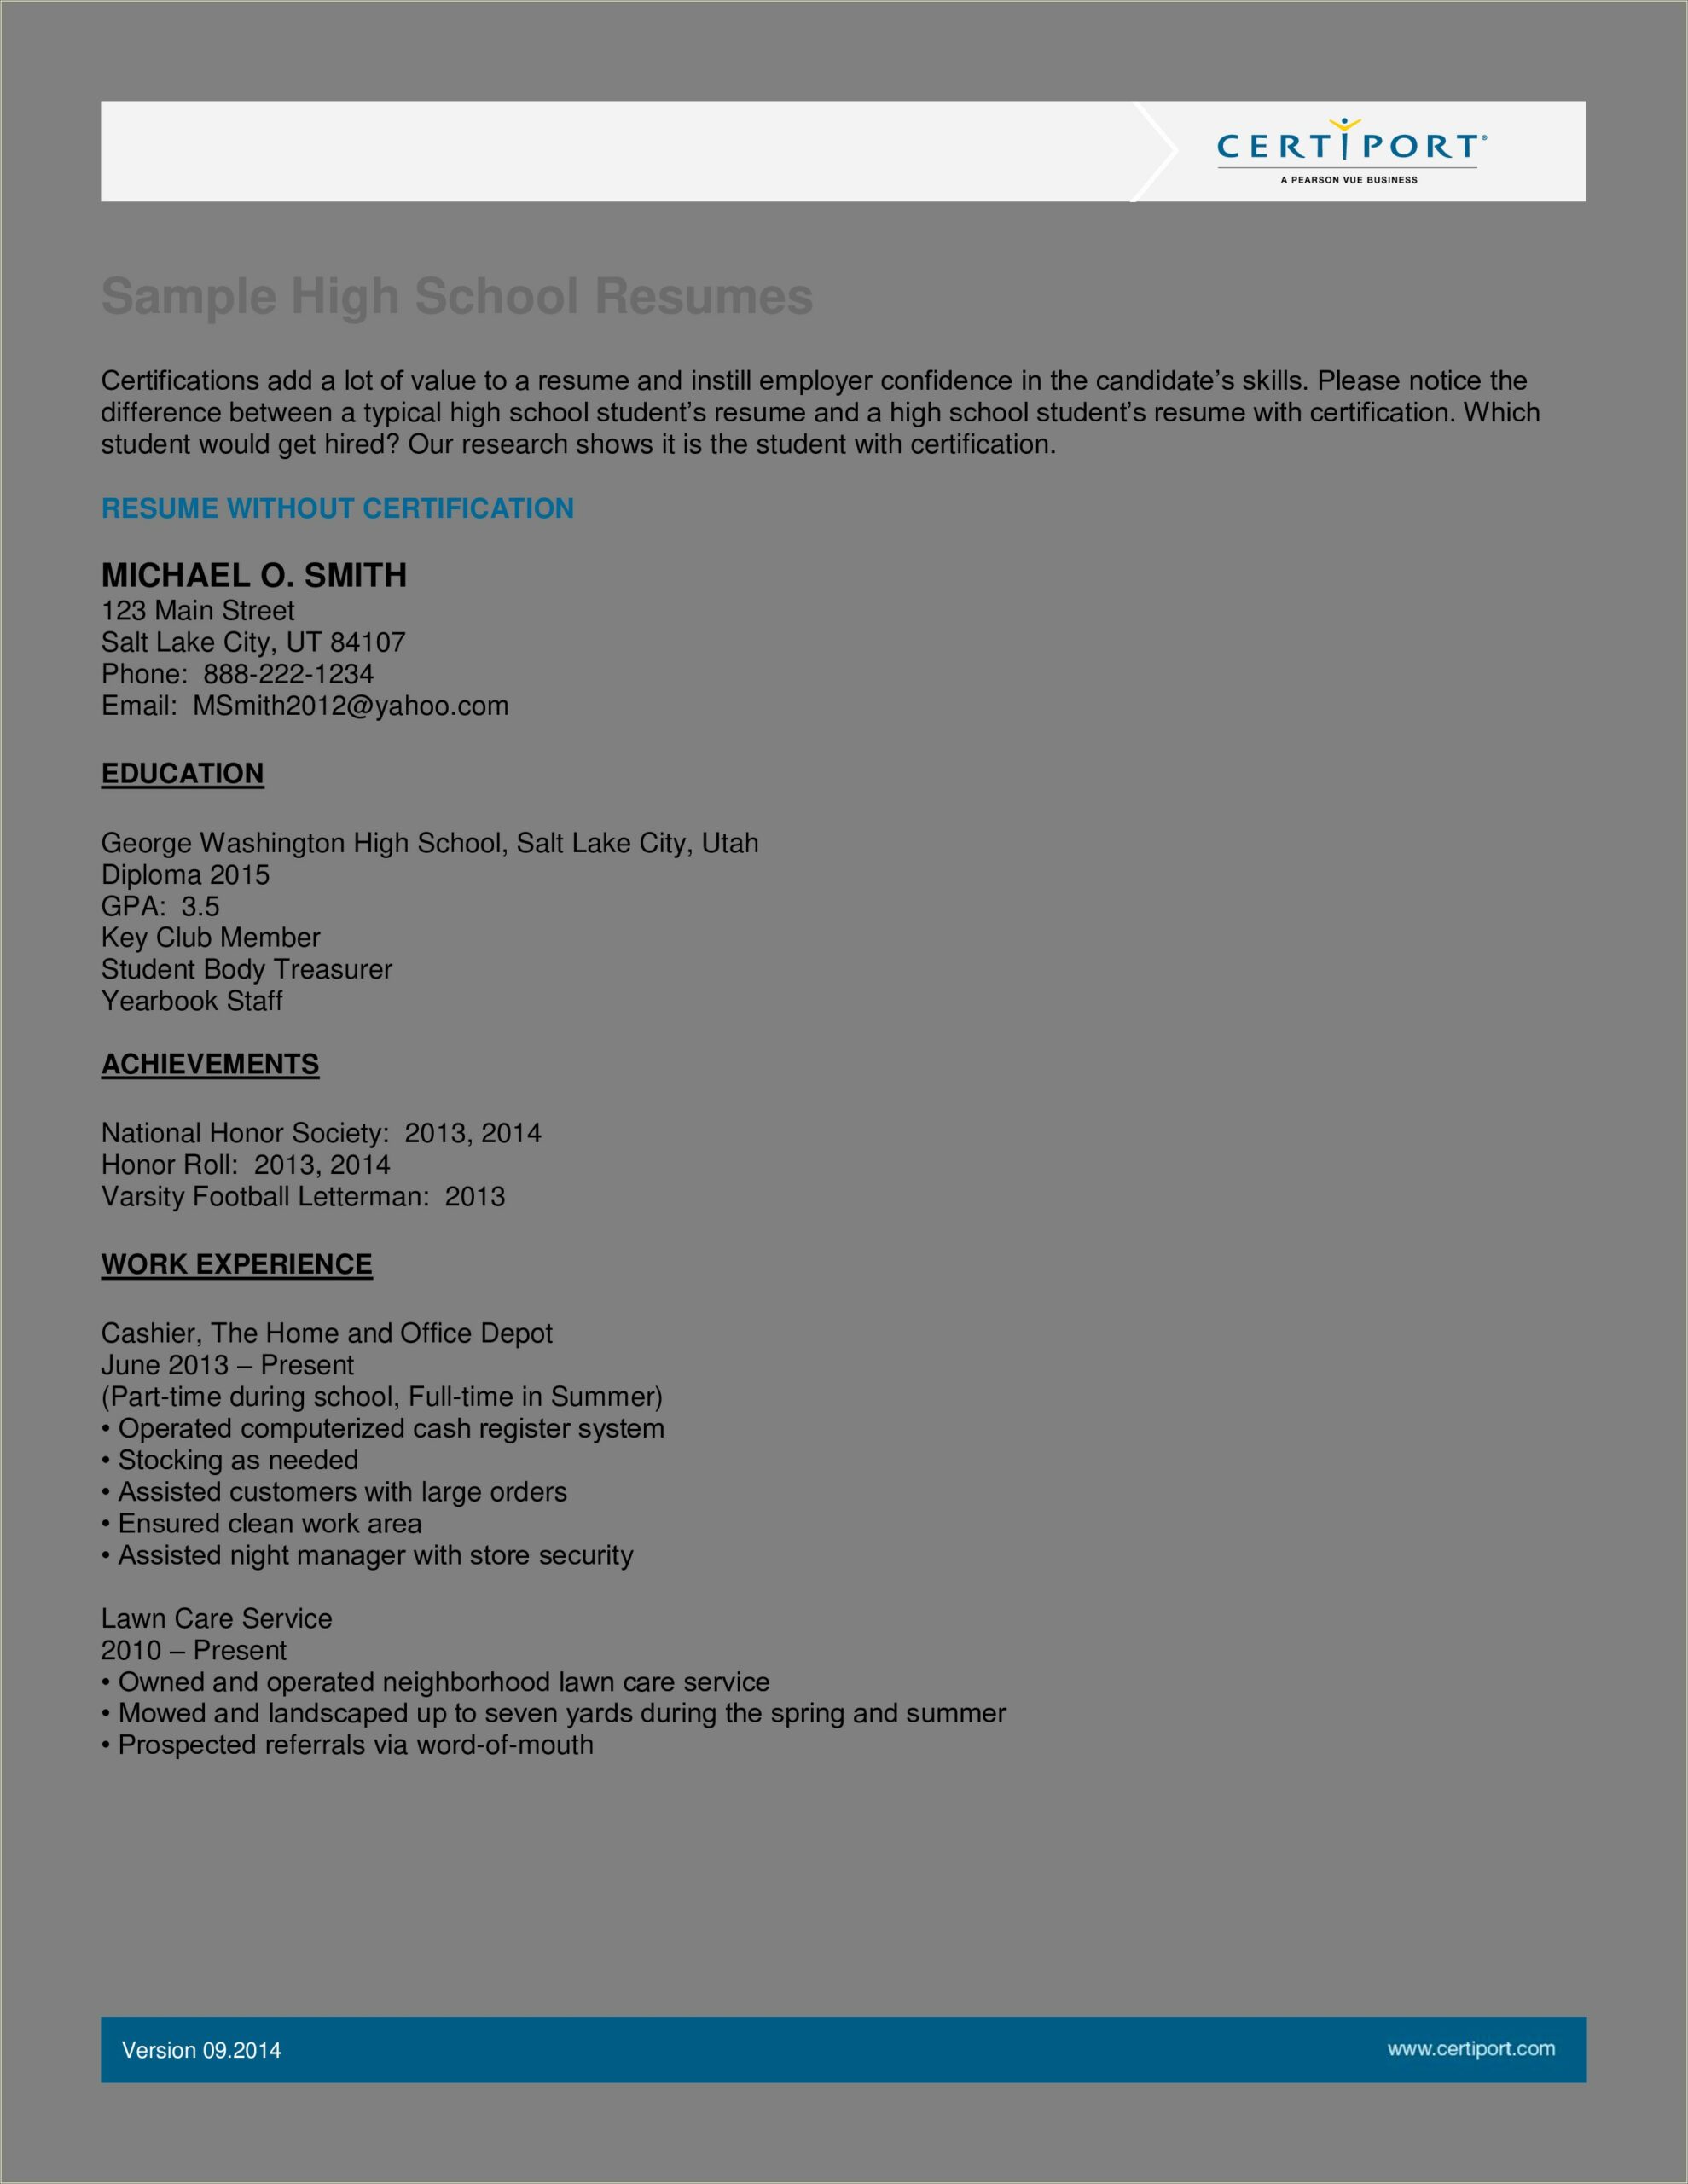 High School Honors Awards On Resume